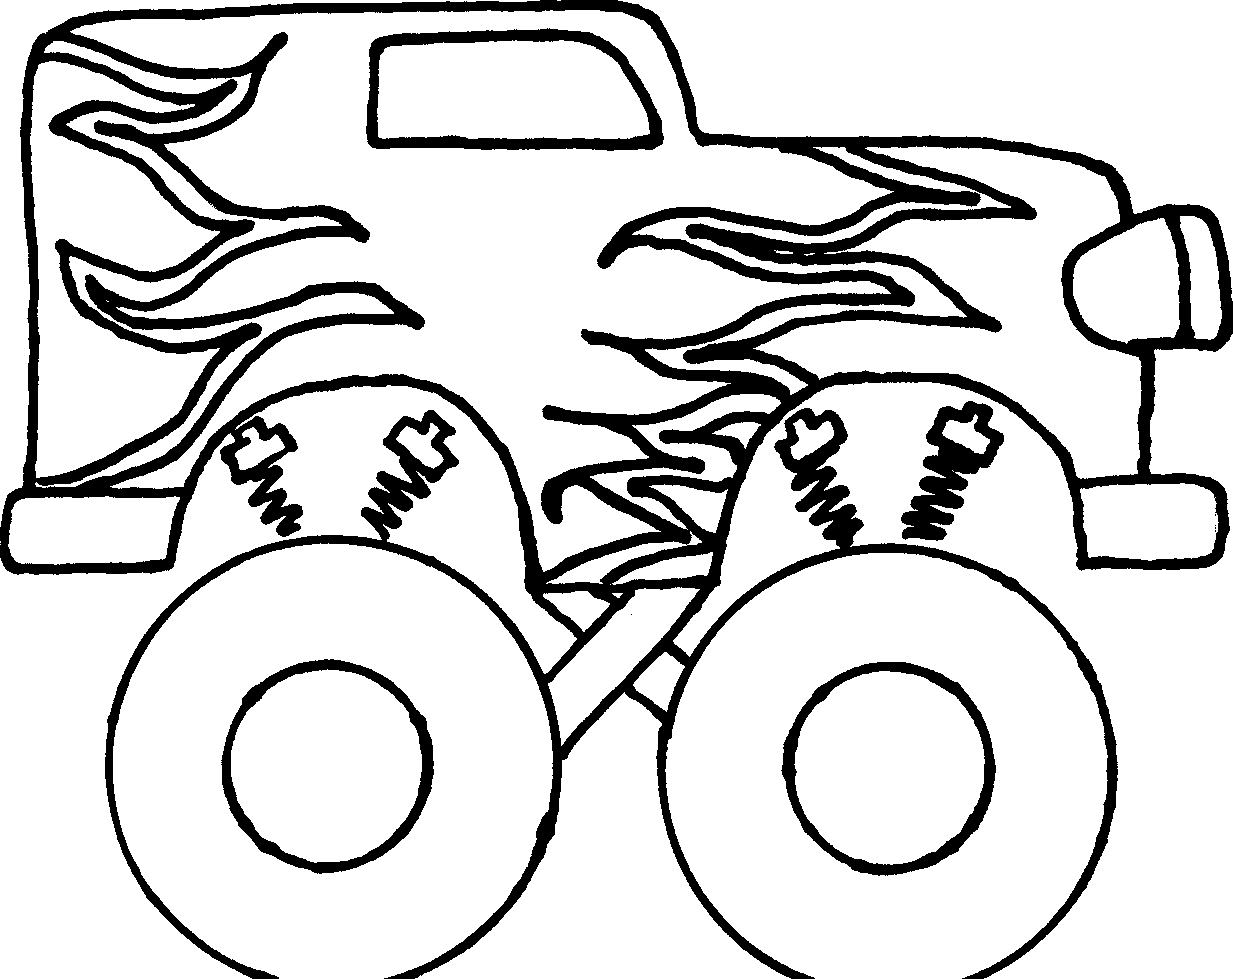 Truck Clipart Black And White   Clipart Panda   Free Clipart Images